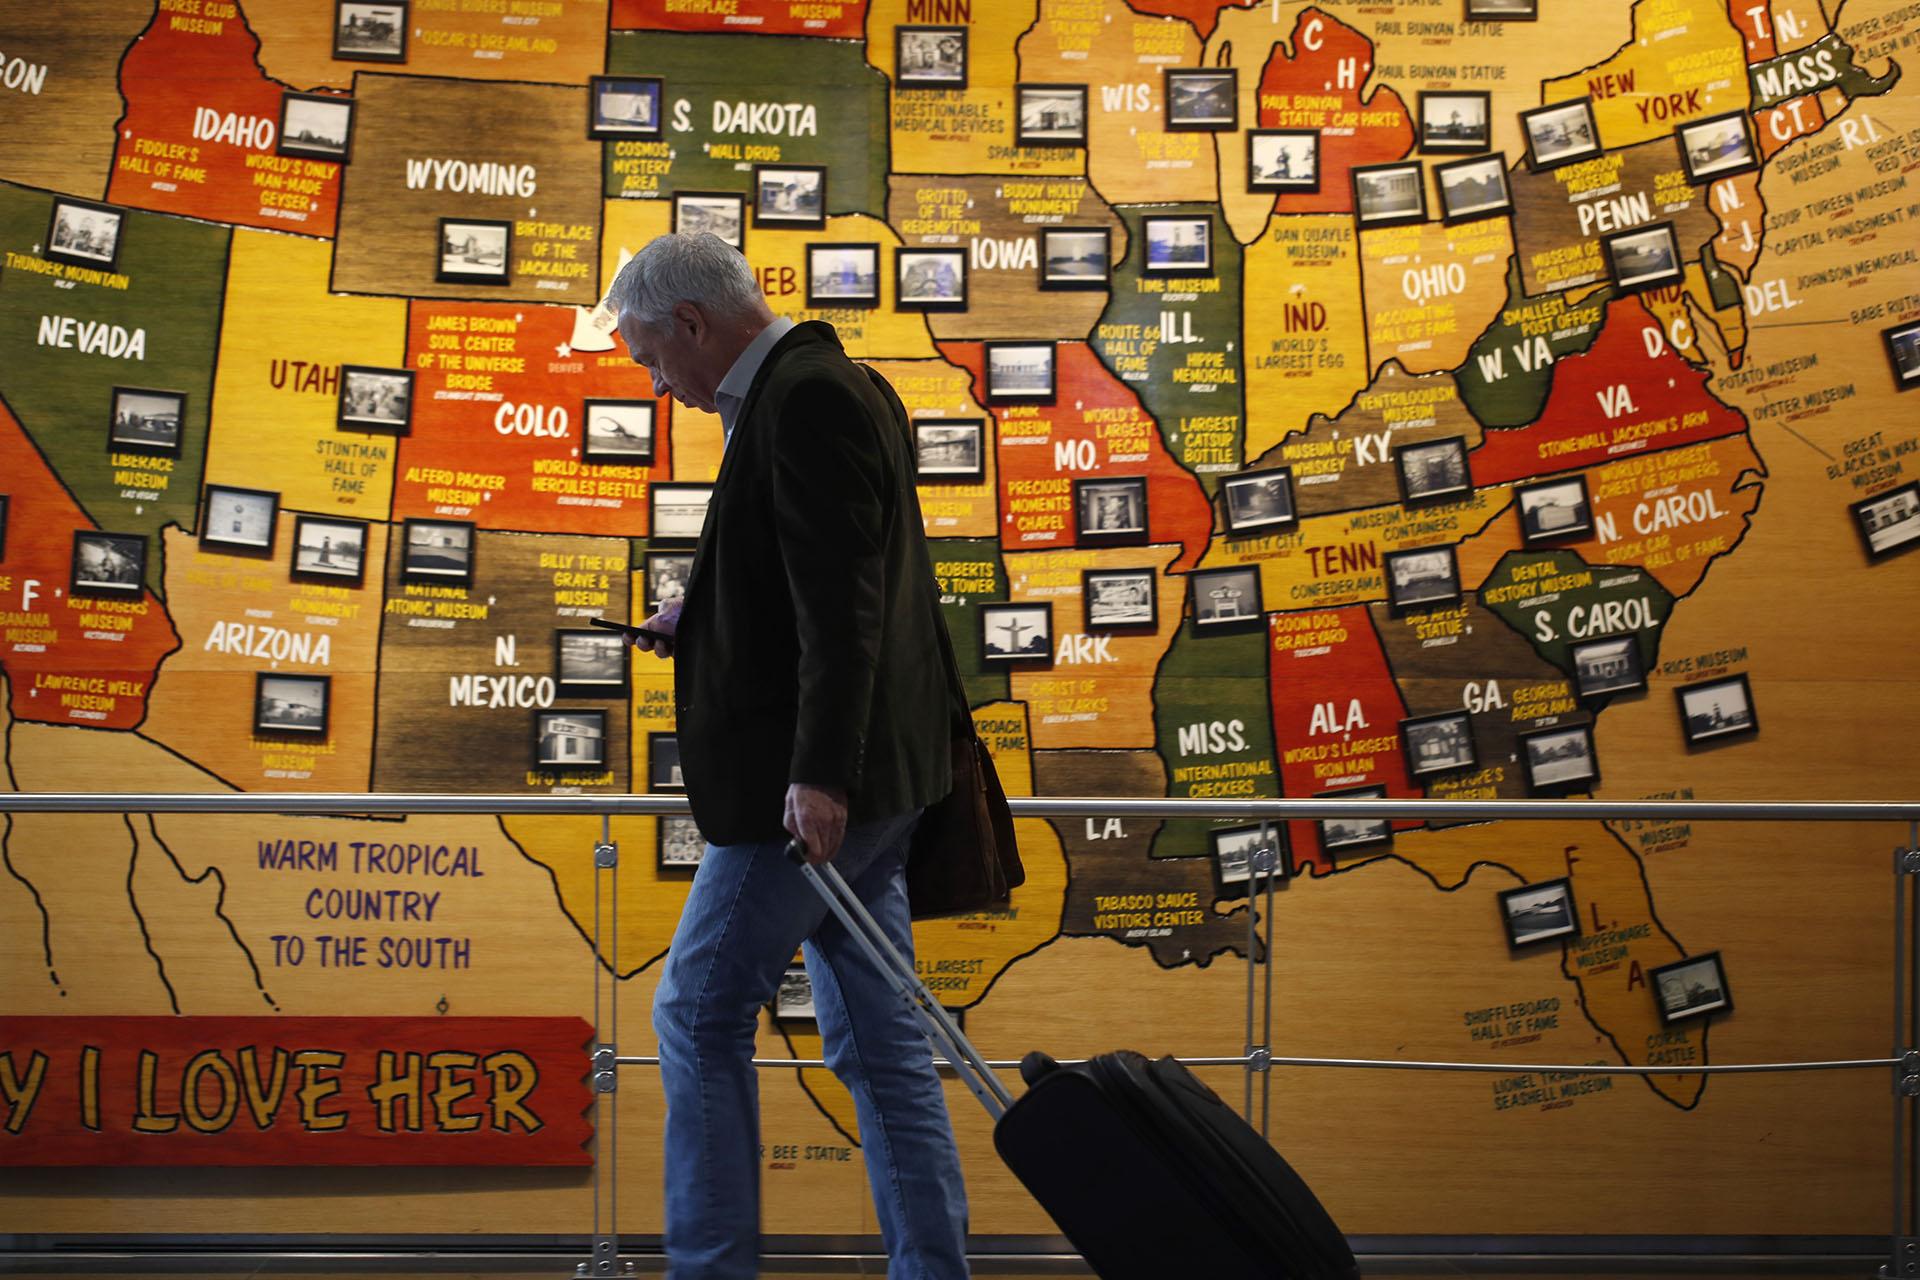 In this March 18, 2020 photo, a traveler checks his mobile telephone while passing a map of the United States on the way to the security checkpoint in the main terminal in Denver International Airport. (AP Photo / David Zalubowski)